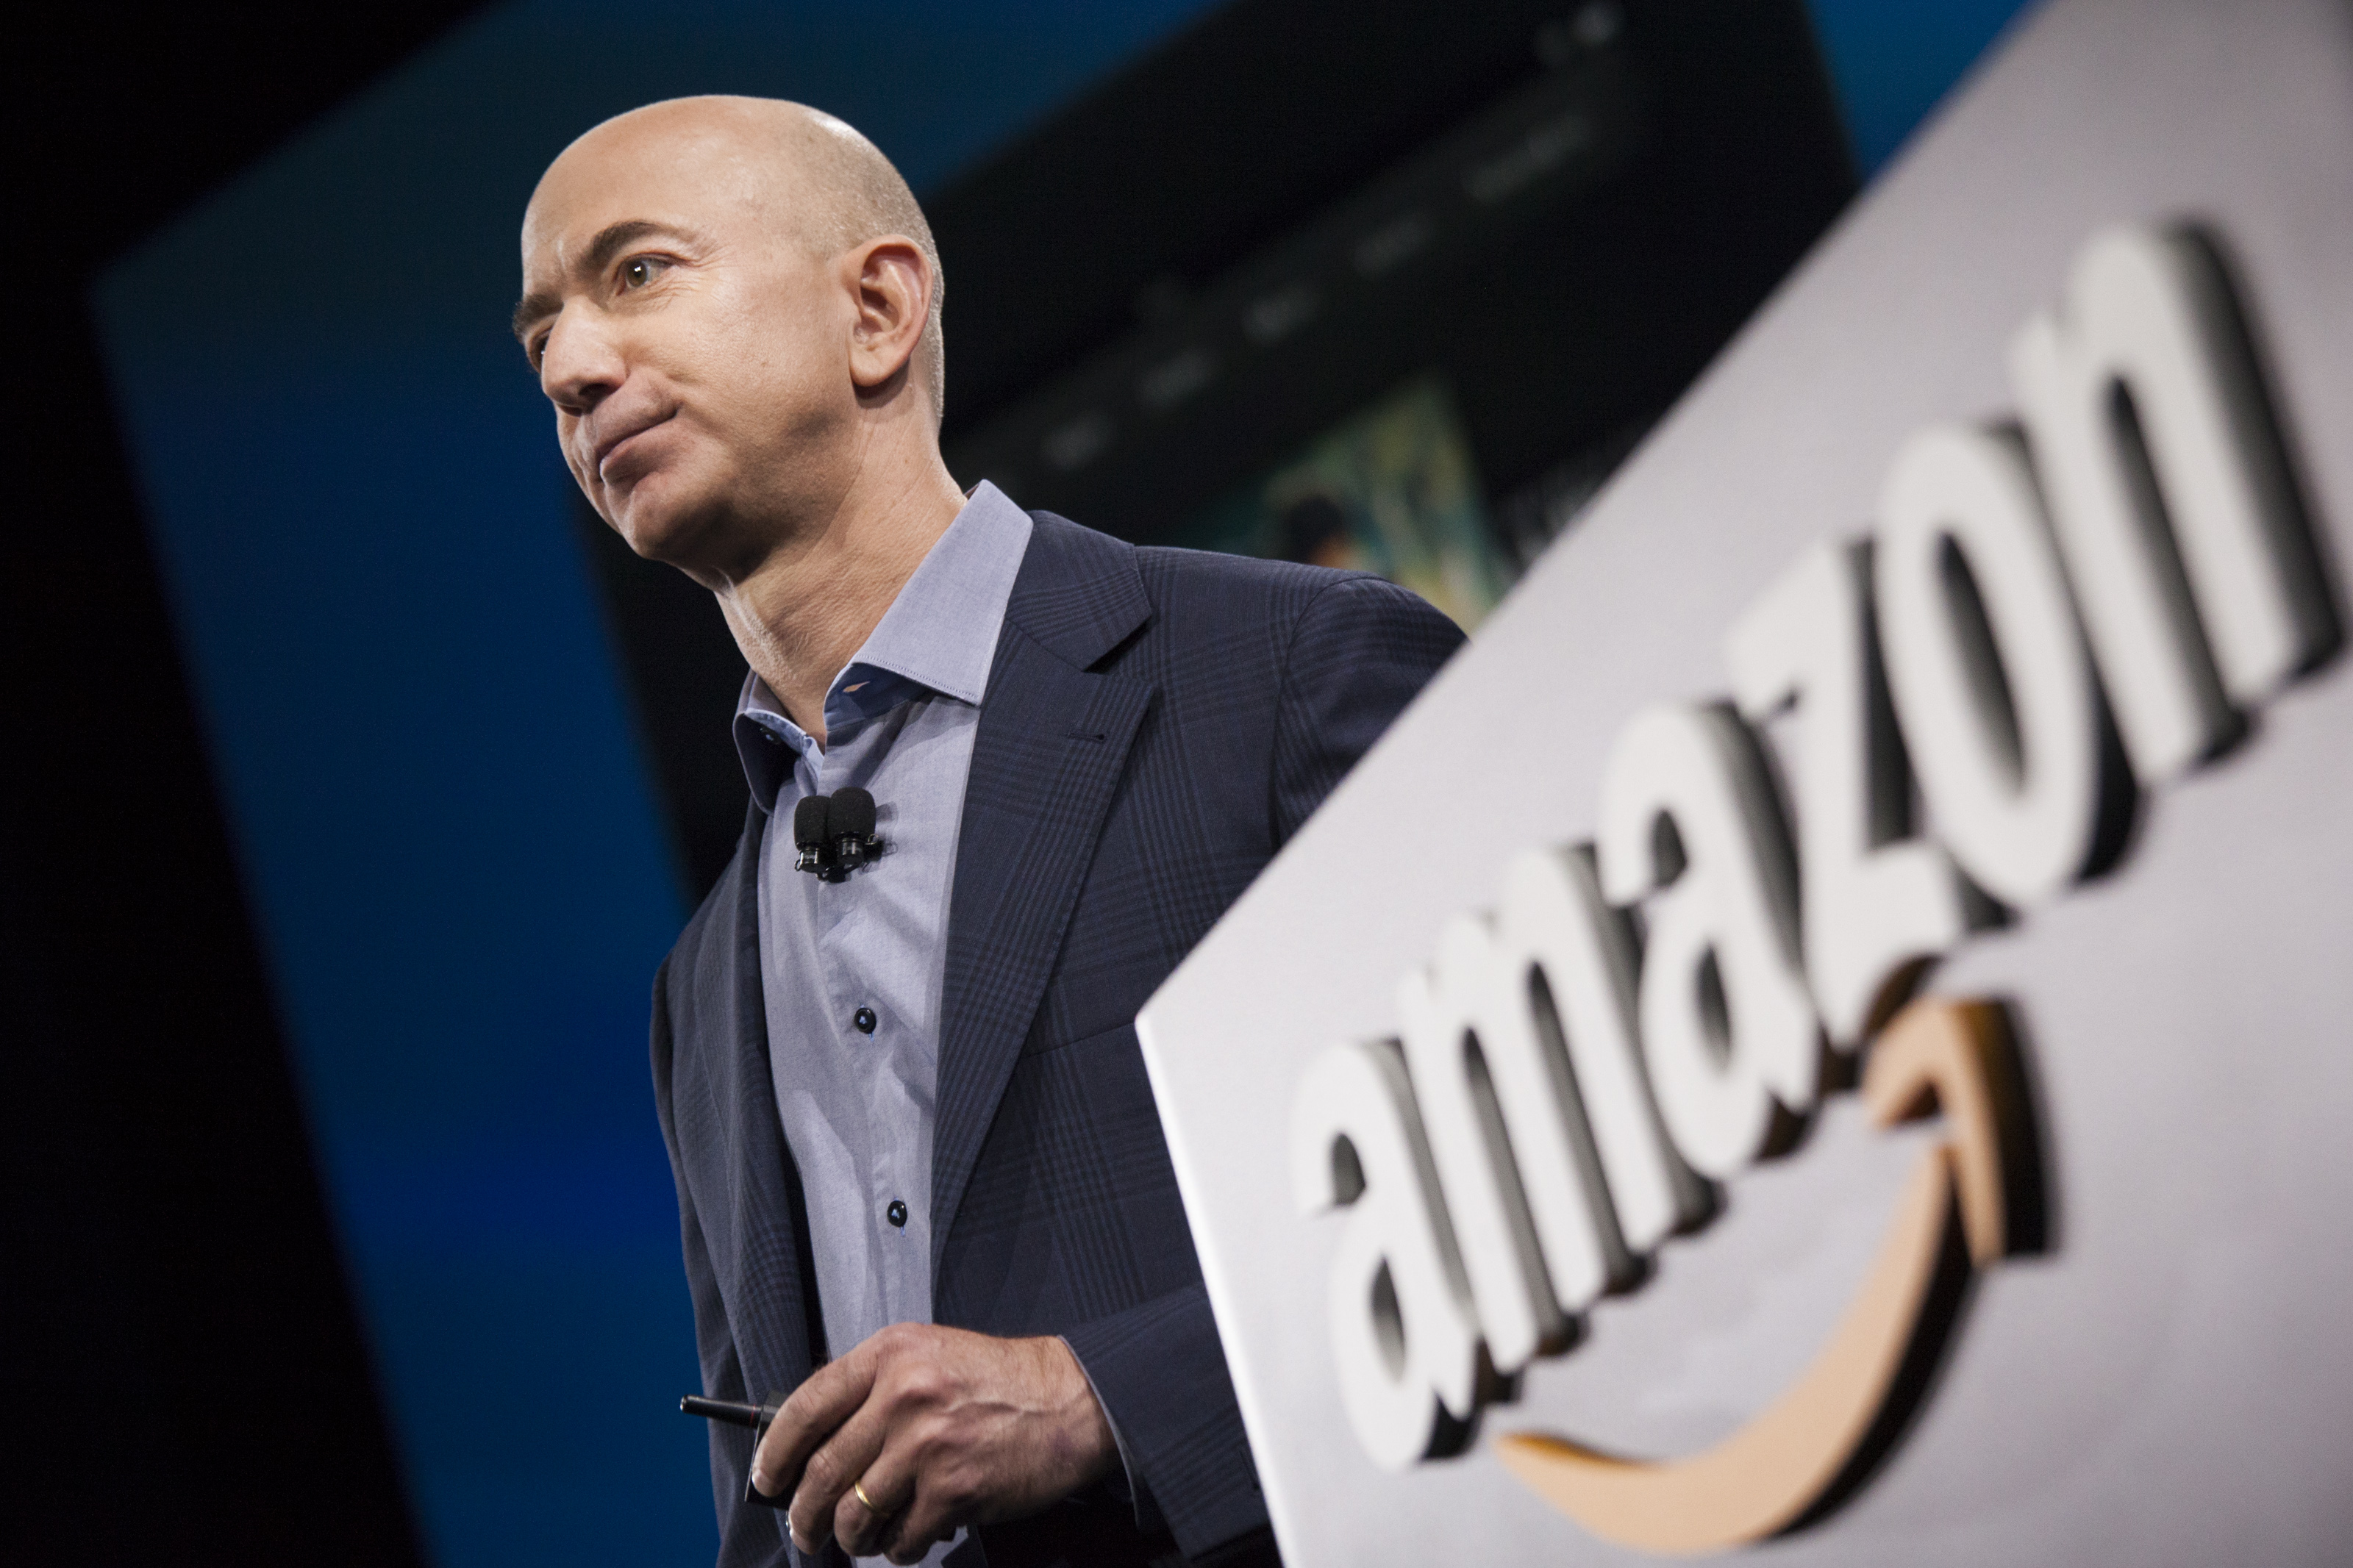 Amazon.com founder and CEO Jeff Bezos presents the company's first smartphone, the Fire Phone, on June 18, 2014 in Seattle, Washington. (David Ryder&mdash;Getty Images)